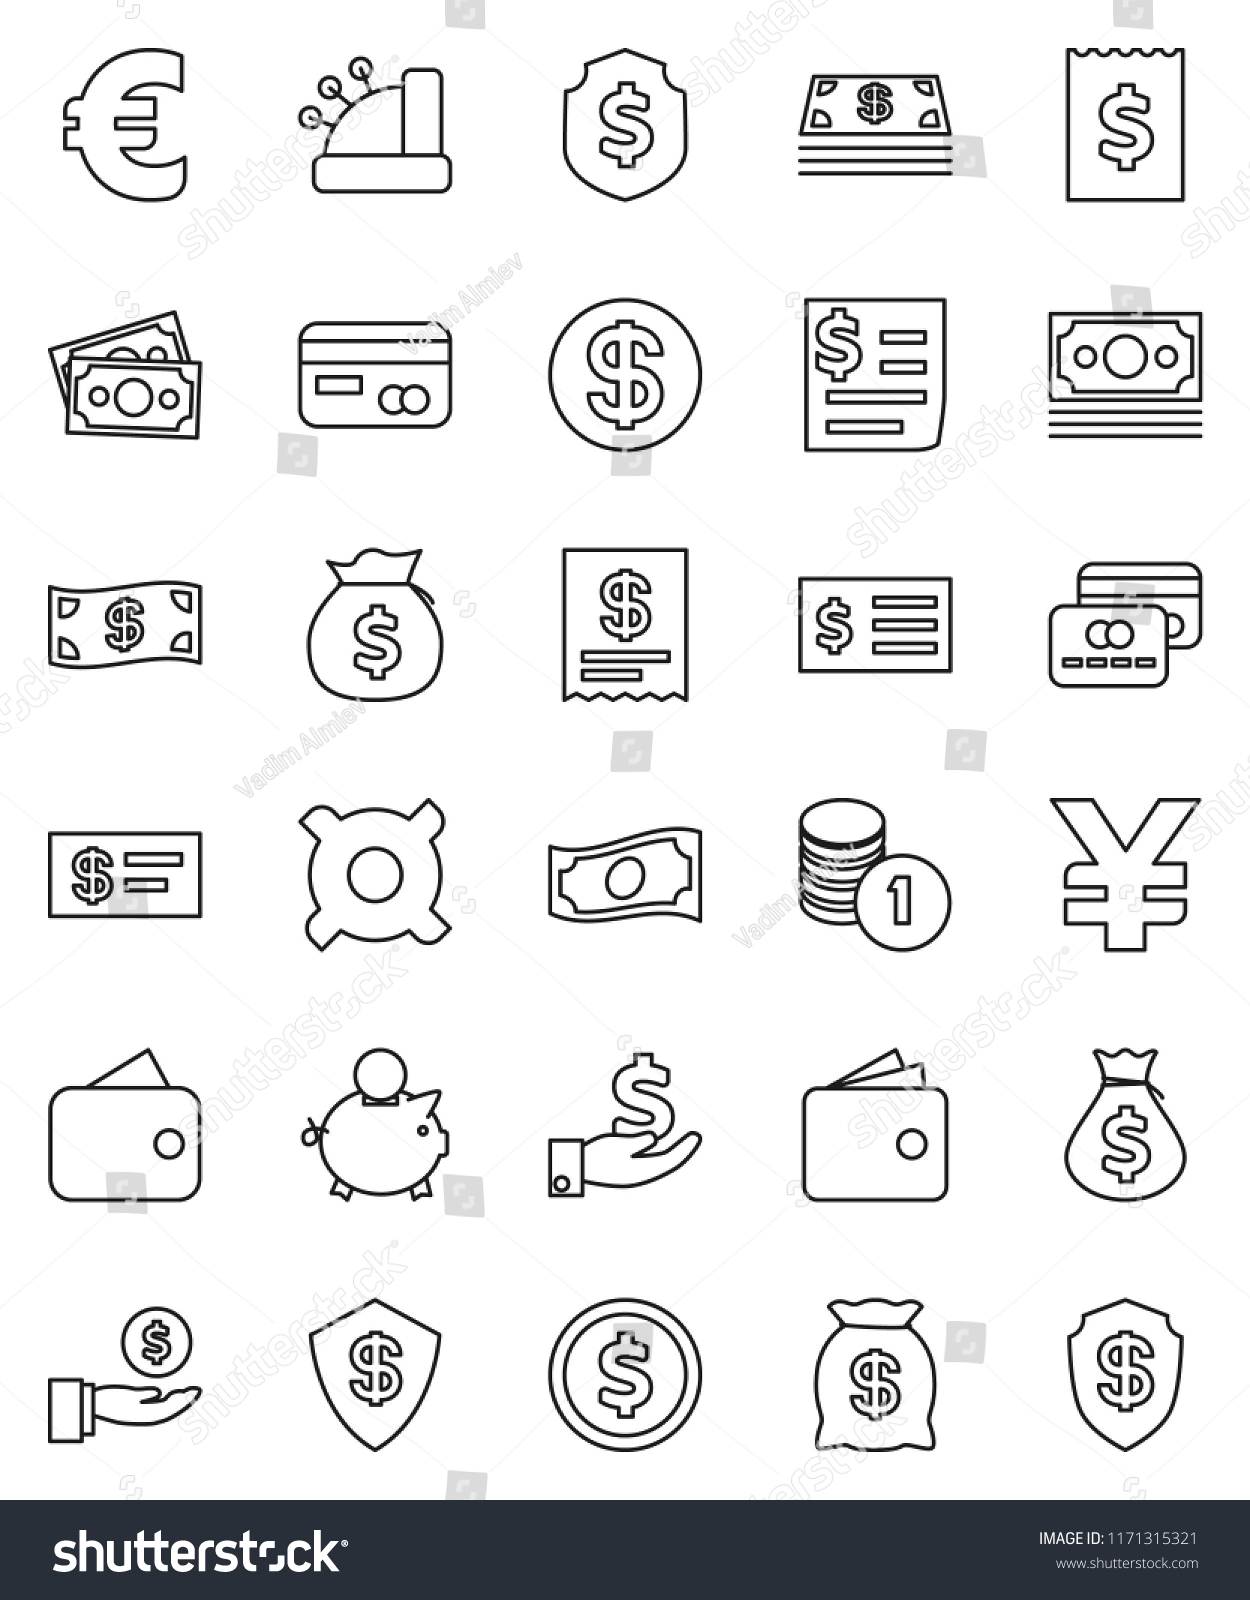 thin line vector icon set - dollar coin vector, wallet, cash, money bag, piggy bank, investment, stack, receipt, shield, any currency, euro sign, yen, credit card, cashbox, check #1171315321